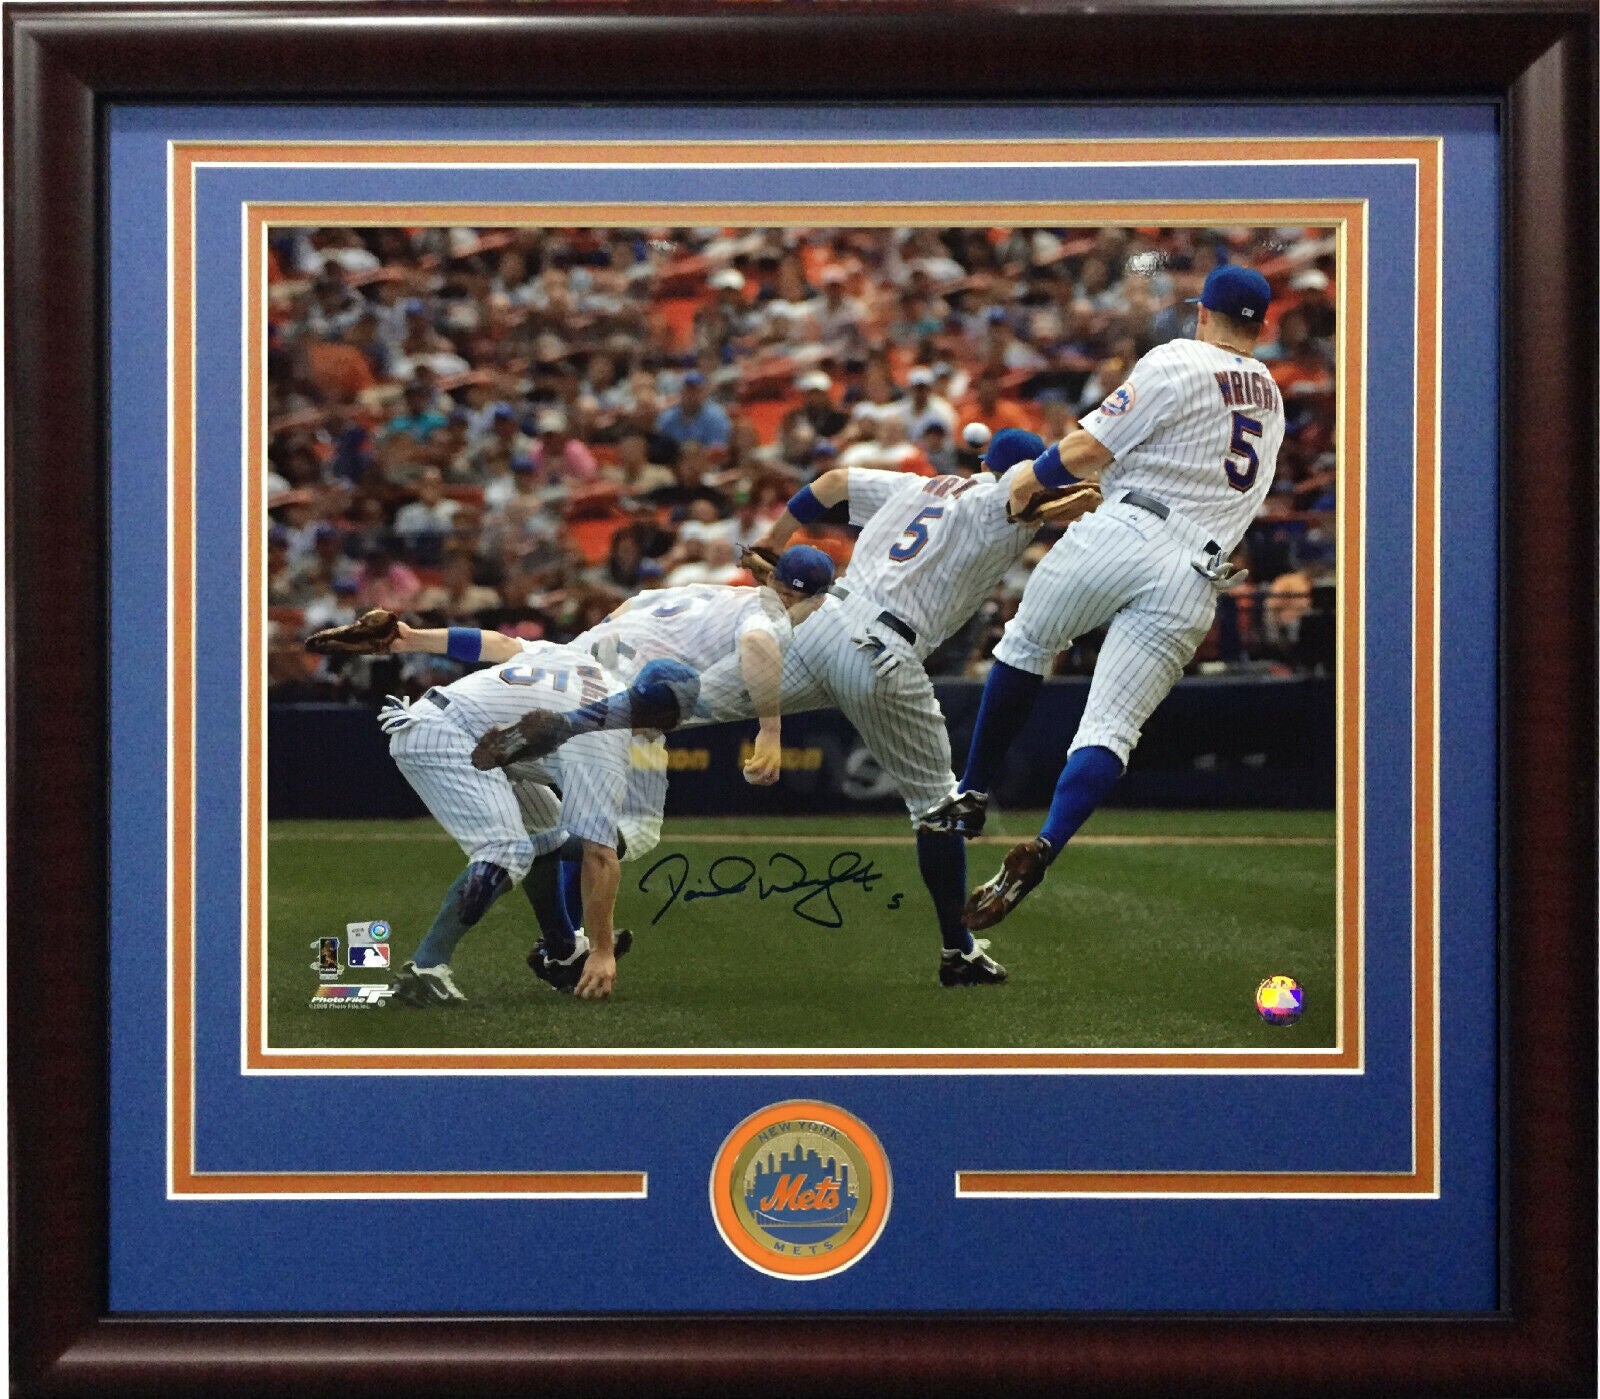 David Wright Signed 16x20 Photo Framed Mets coin captain autograph